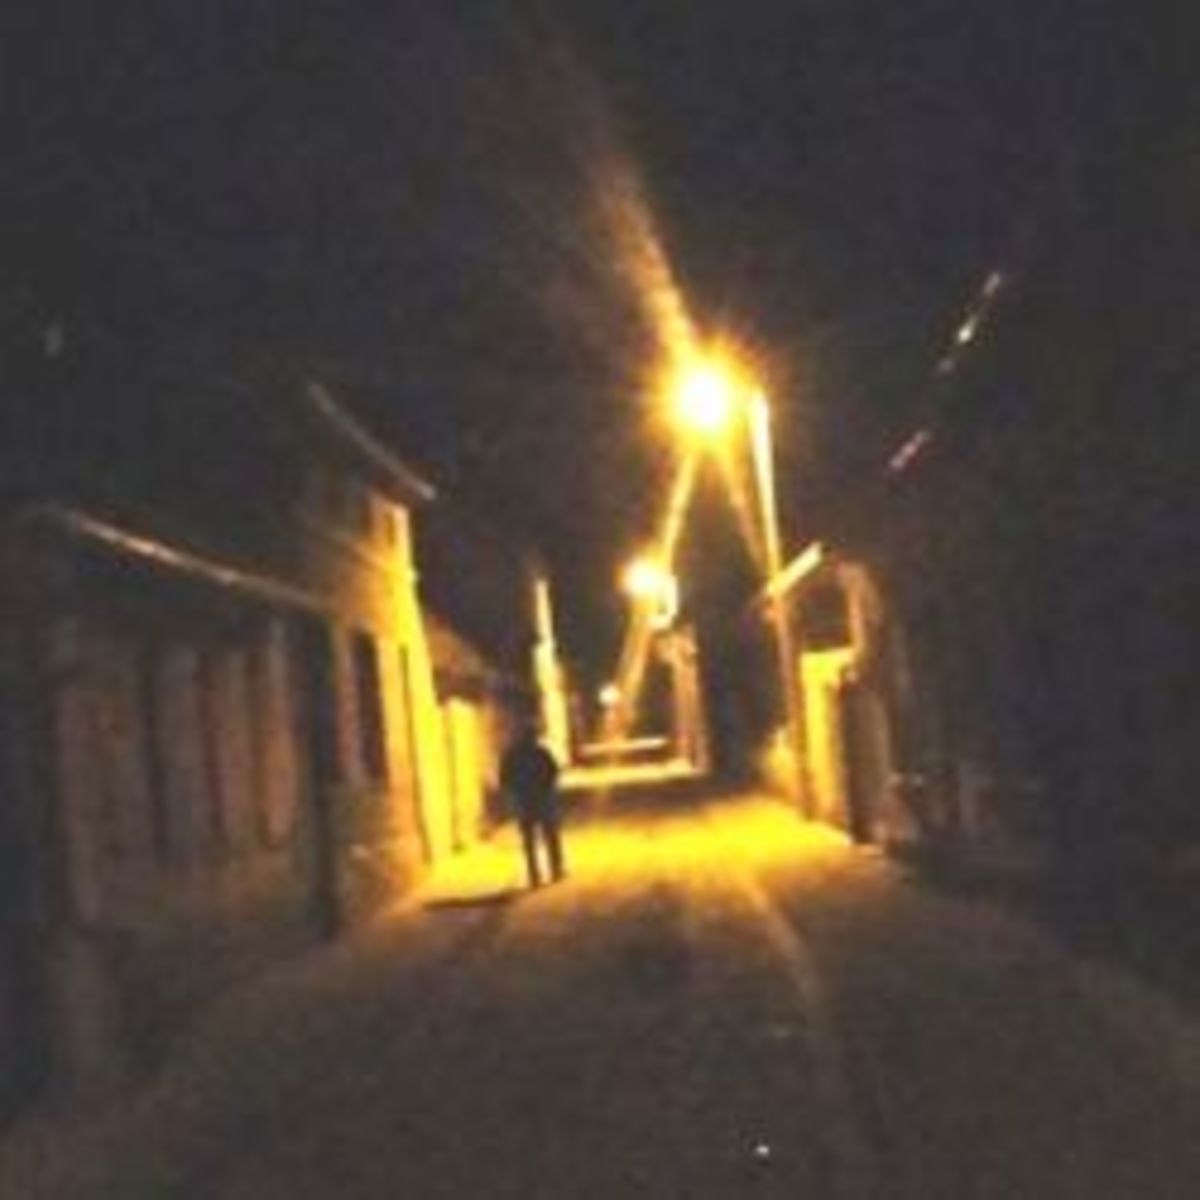 A tilted view of a person walking down a poorly-lit street at night.